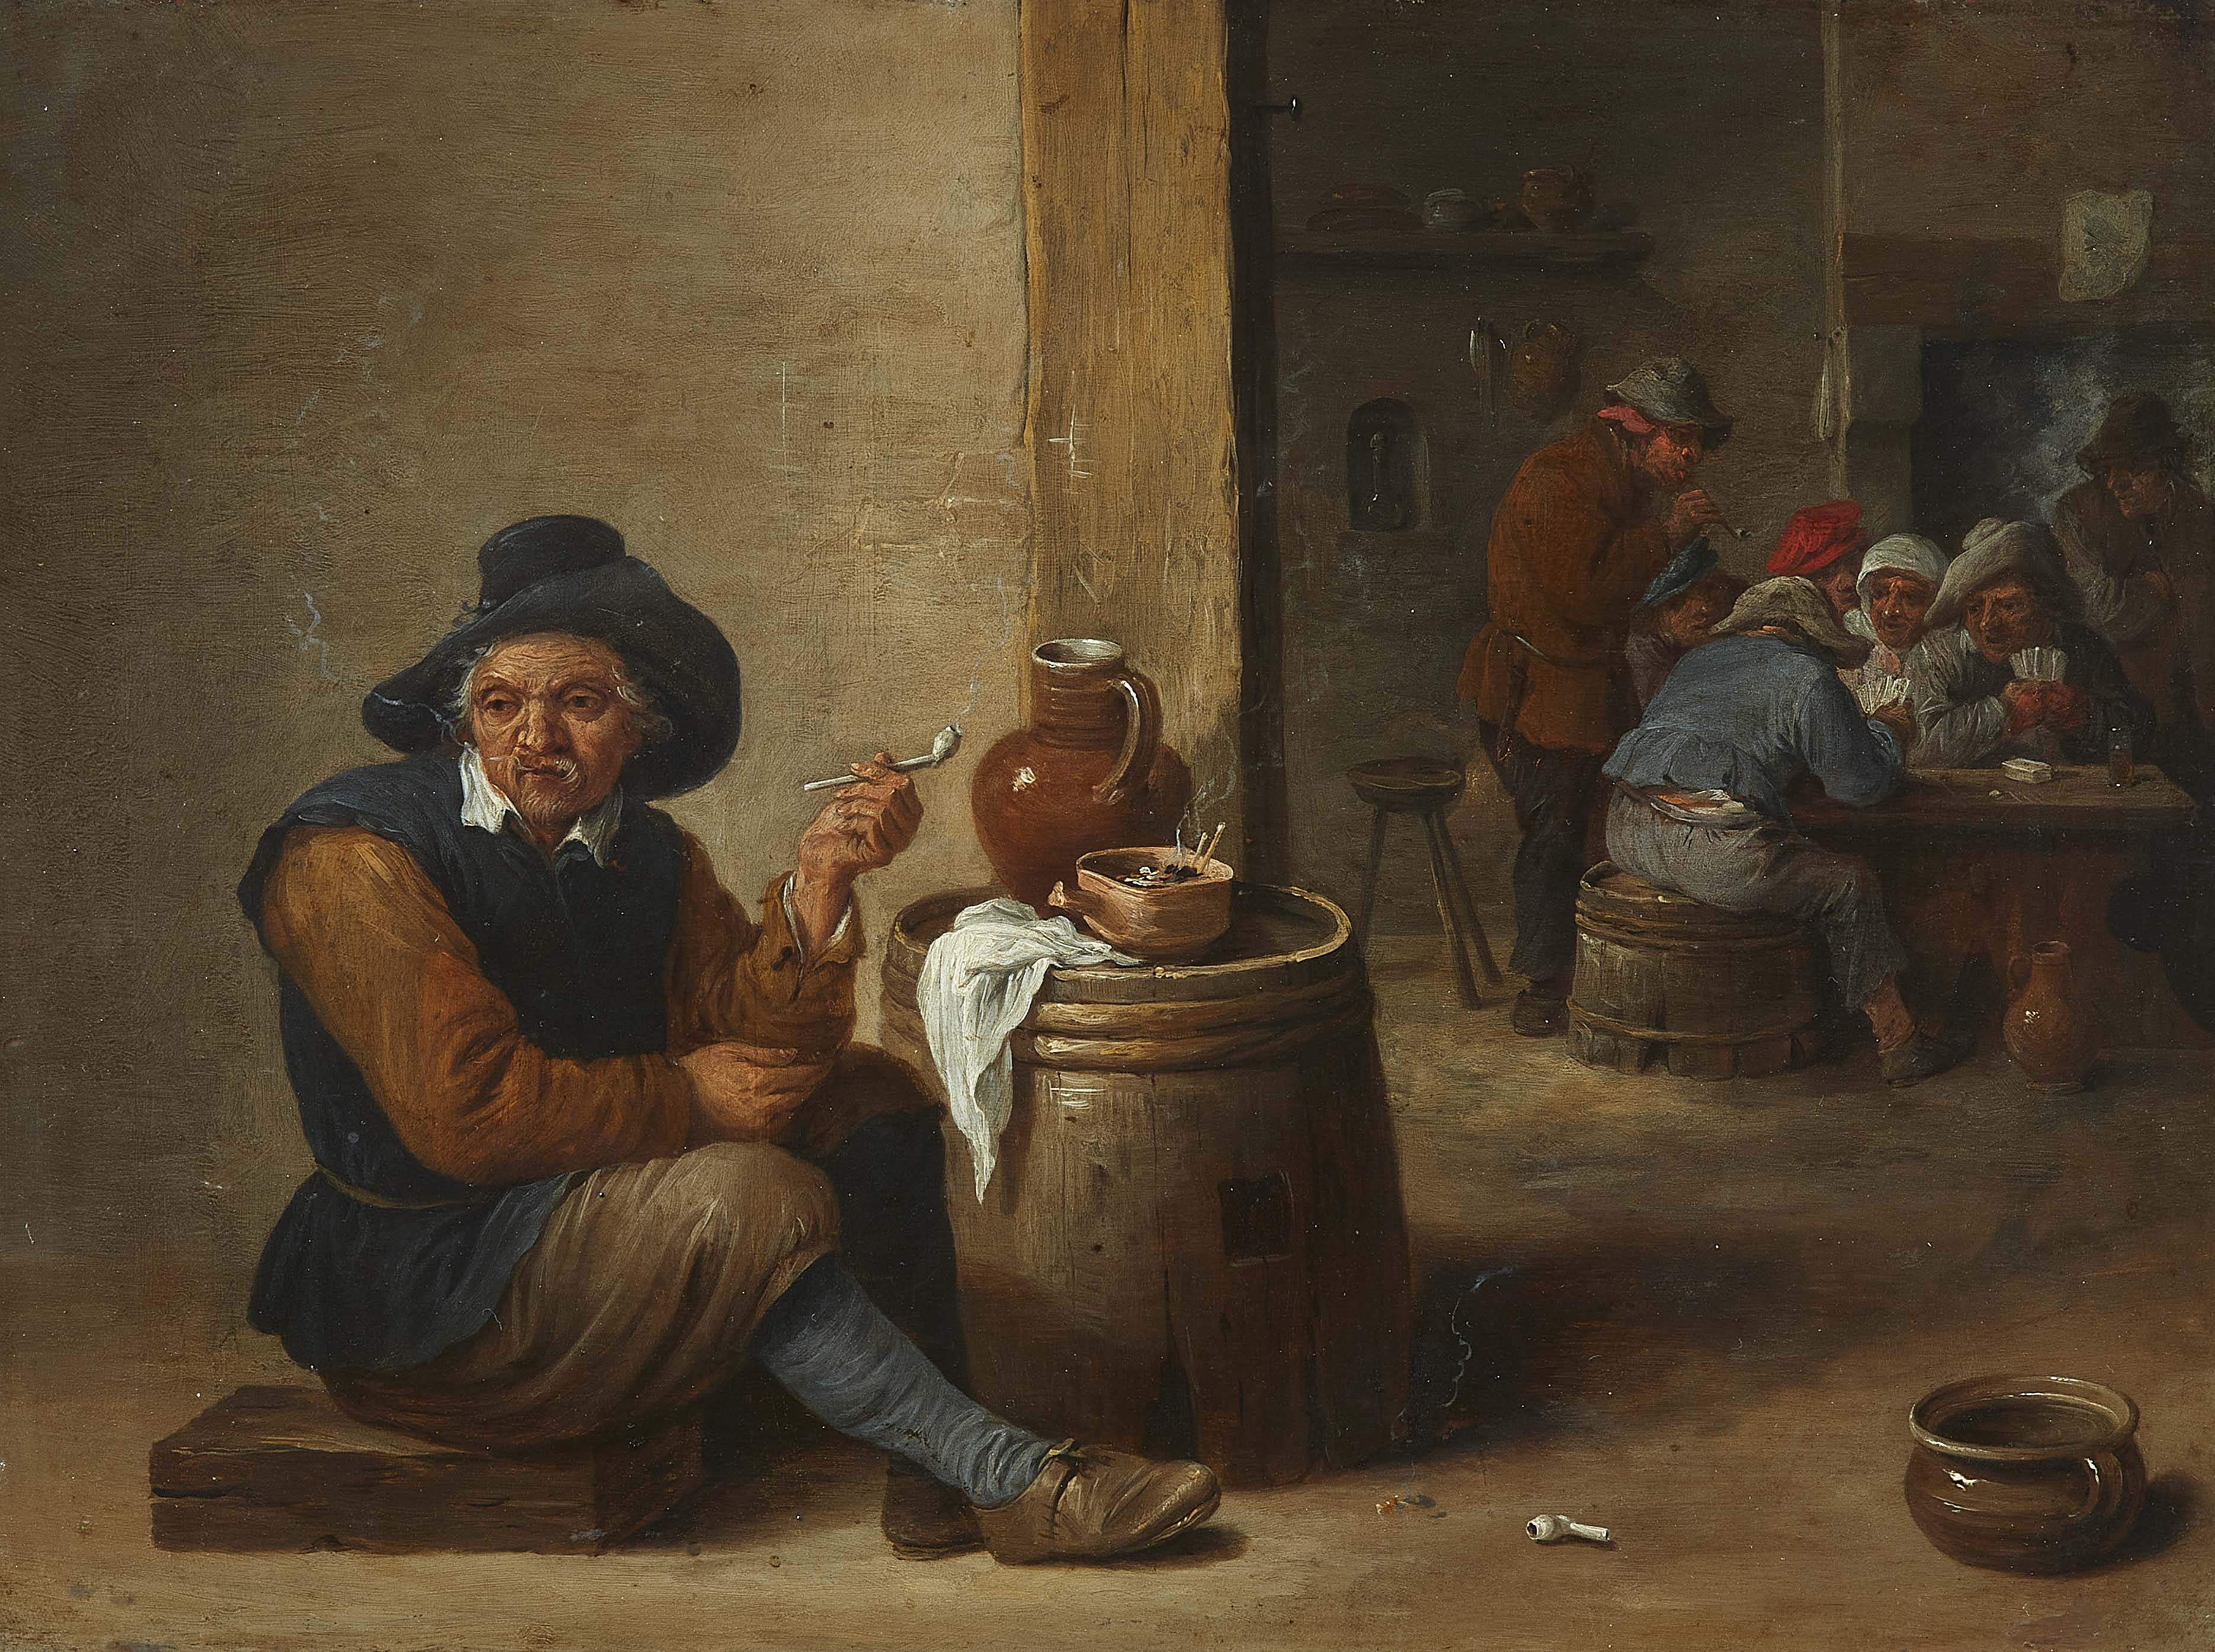 David Teniers the Younger - Pipe smoking man and card player - image-1